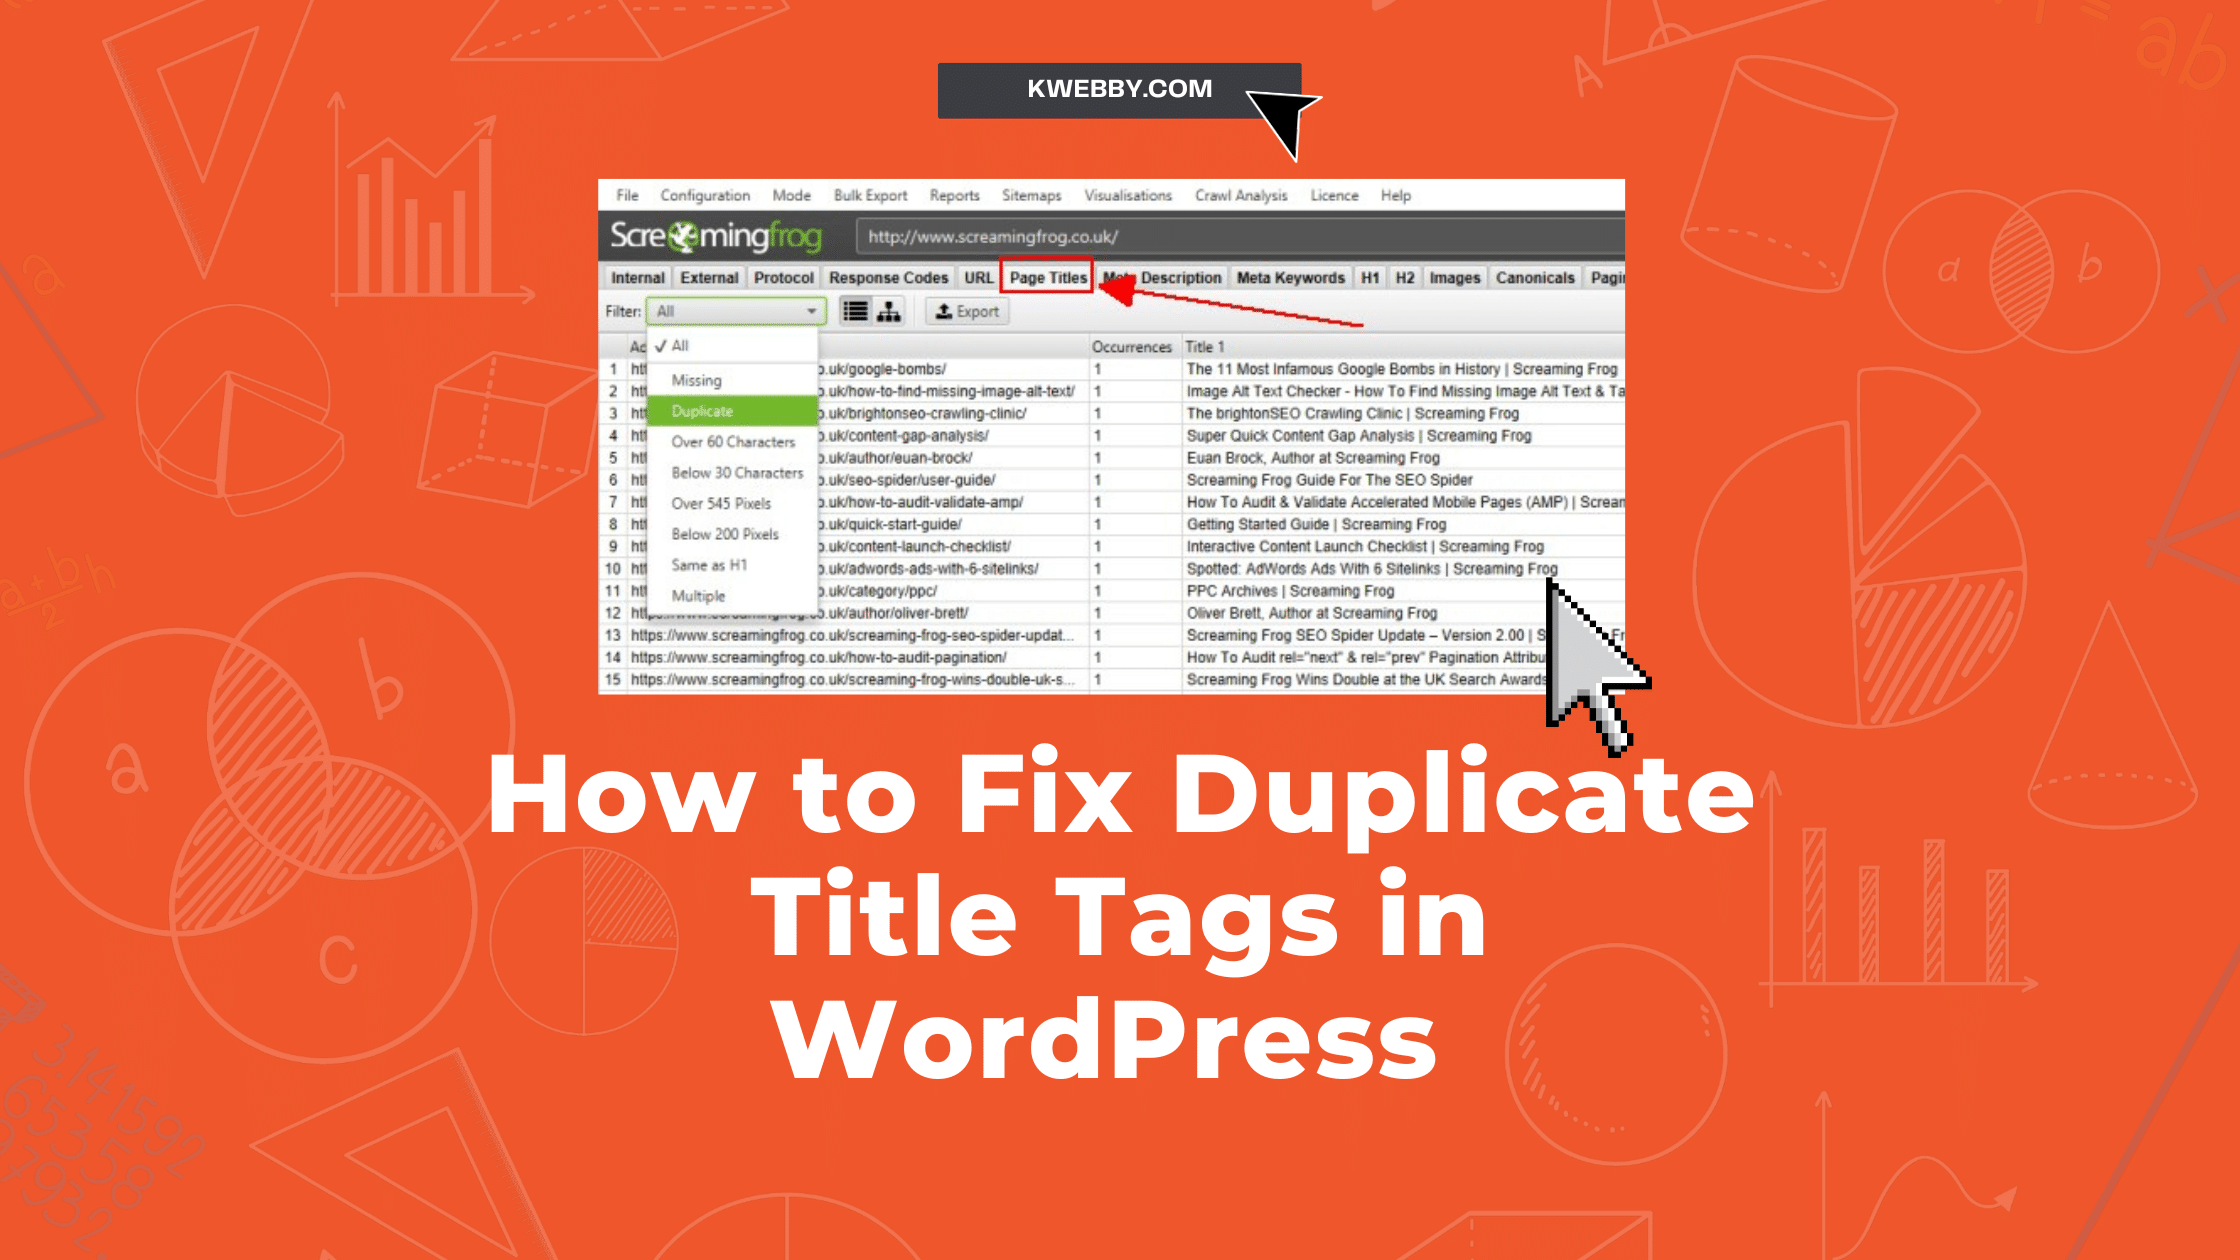 How to Fix Duplicate Title Tags in WordPress (2 Easy Methods)